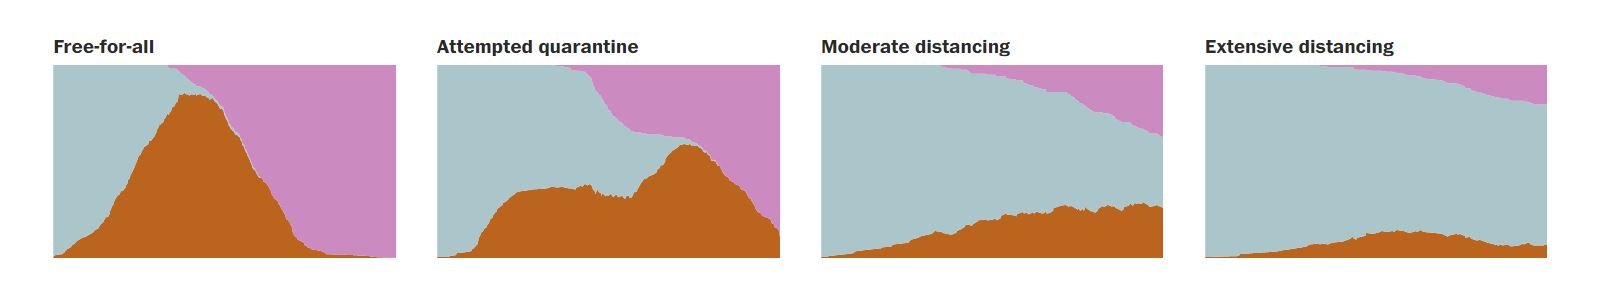 Screen shot from a Washington Post article that shows 4 models of the spread of a disease resulting from varying levels of social distancing. 